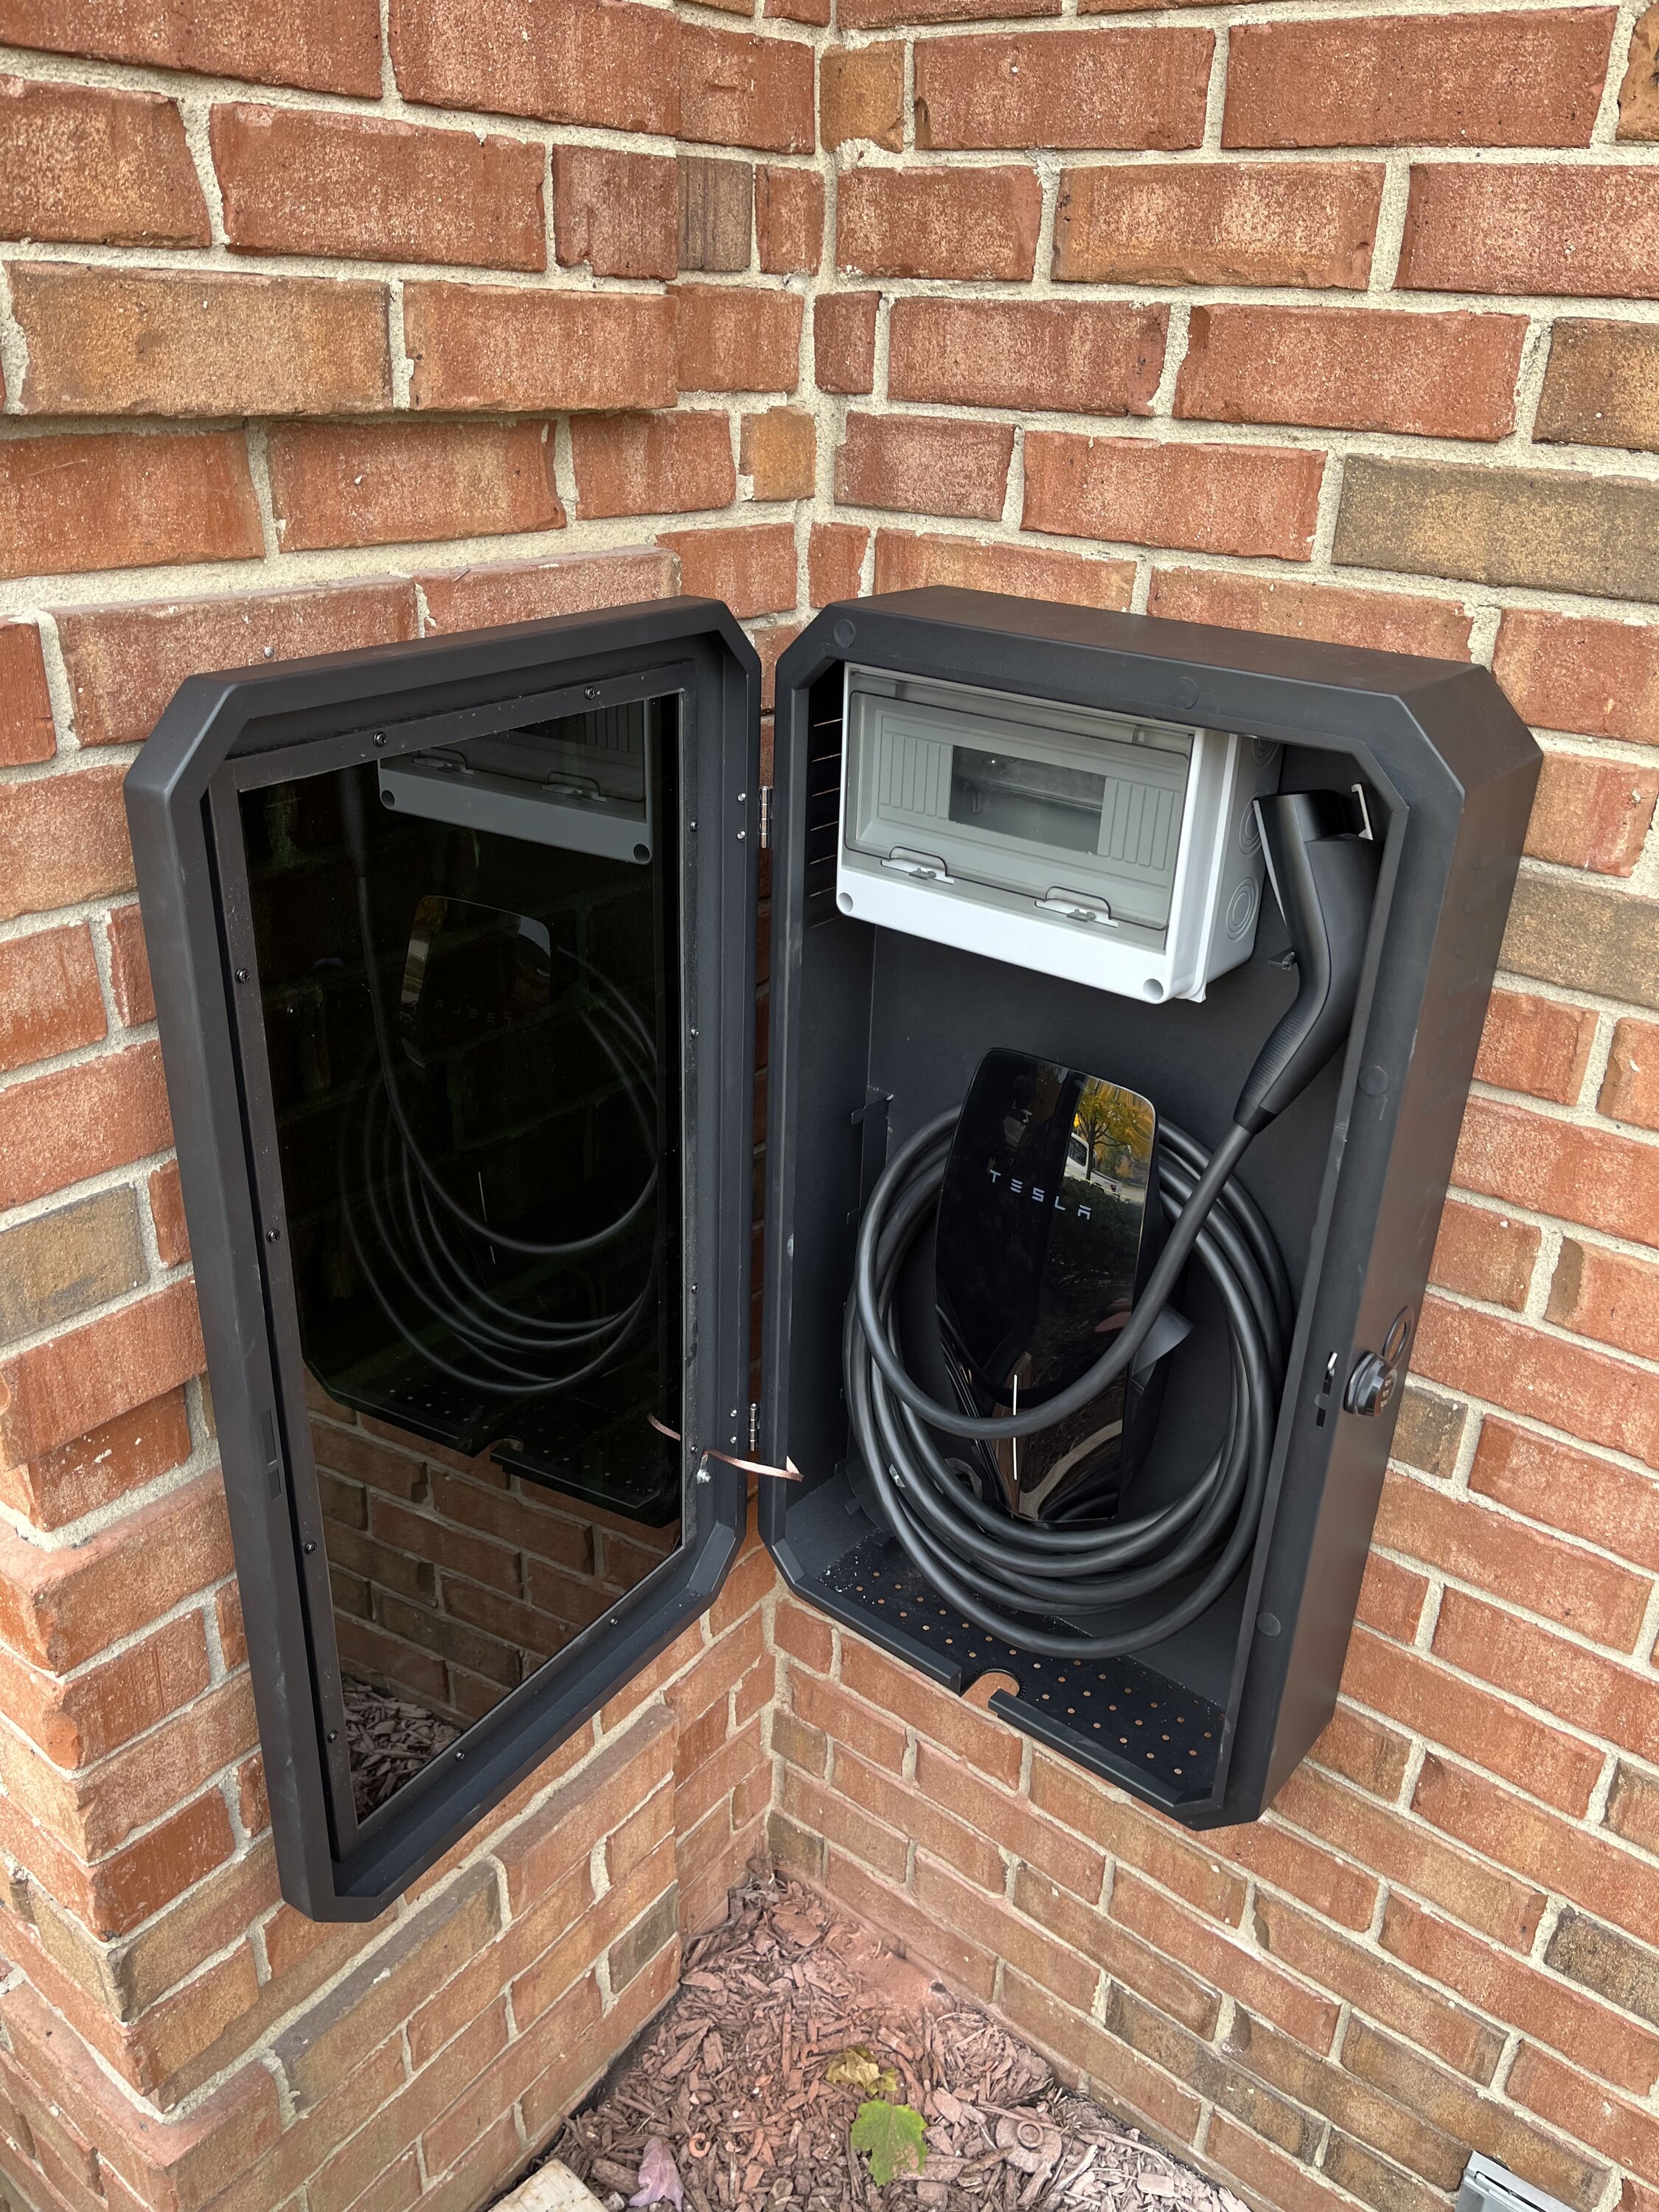 Tesla Universal Wall Connector home charger - it's here!